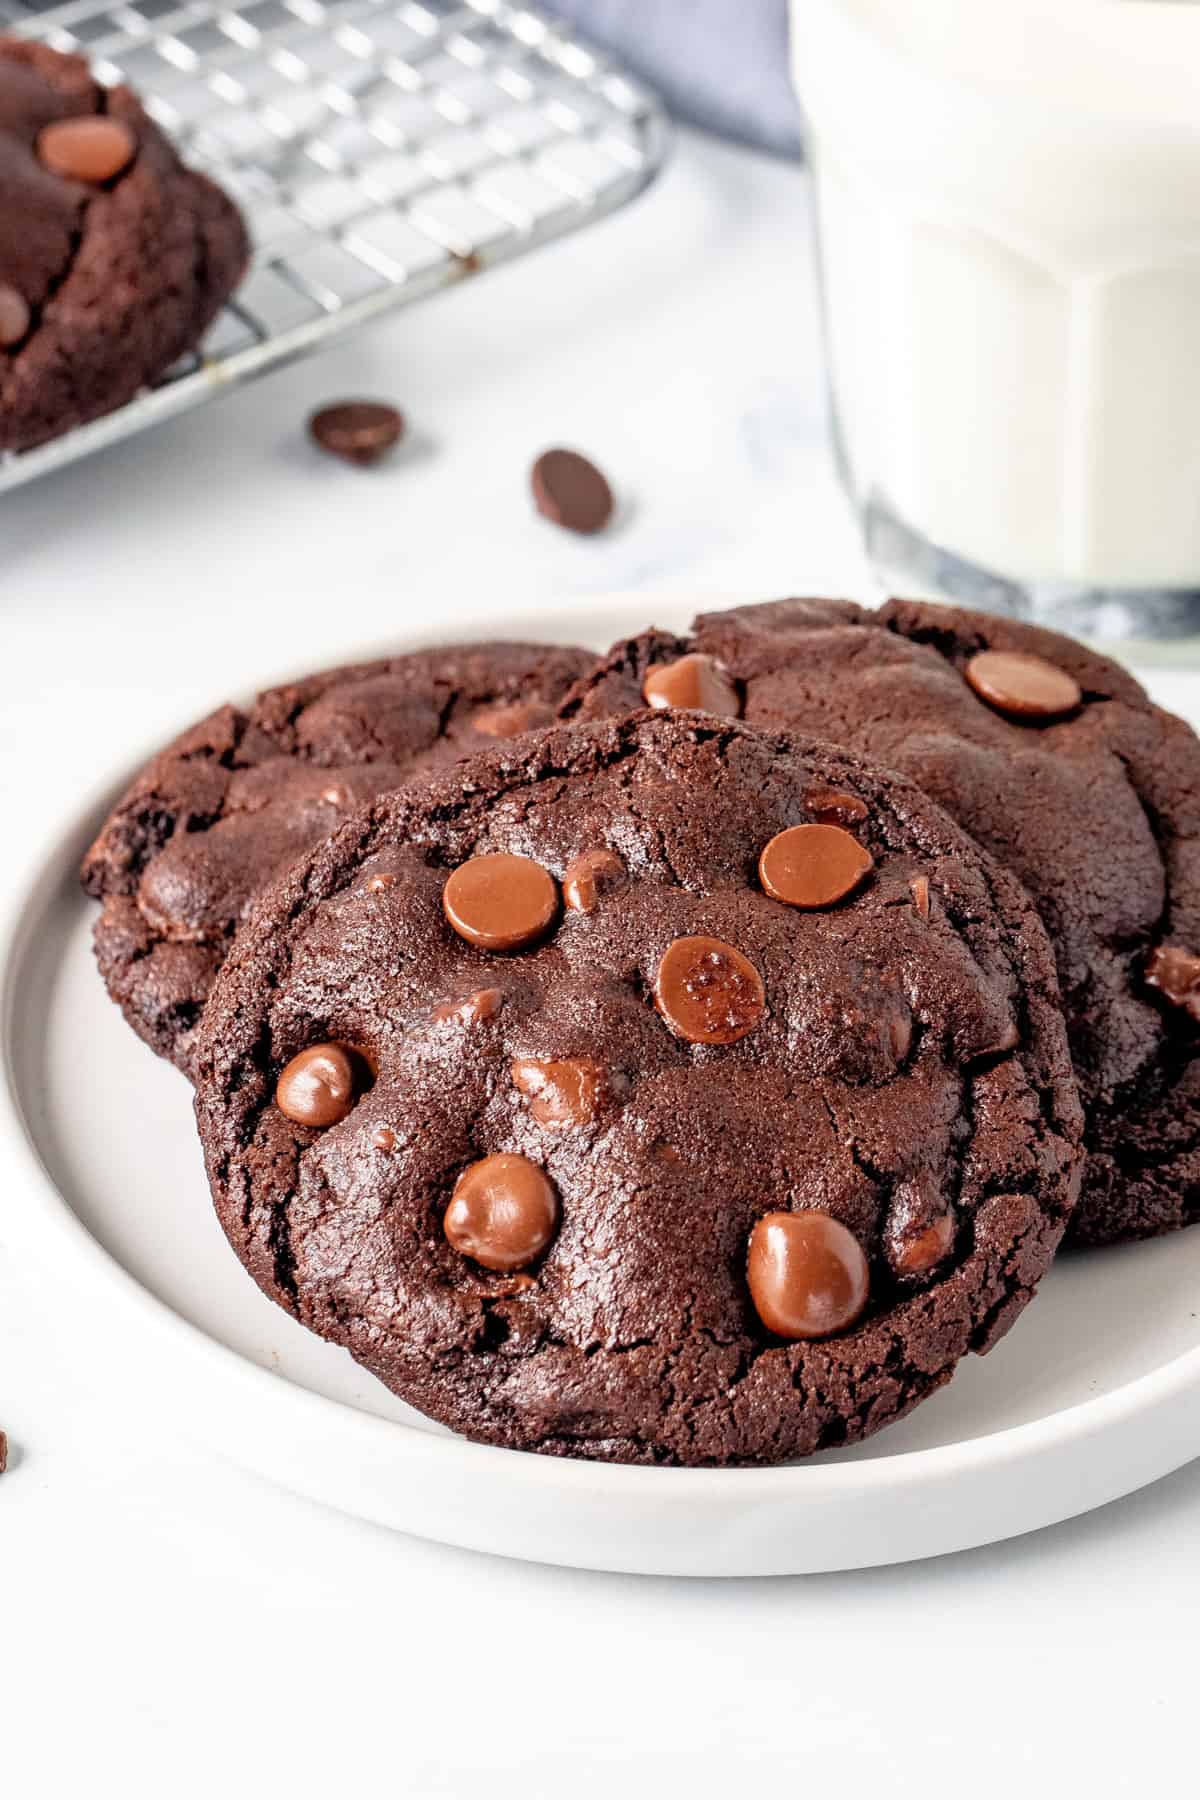 Plate of 3 bakery double chocolate chip cookies